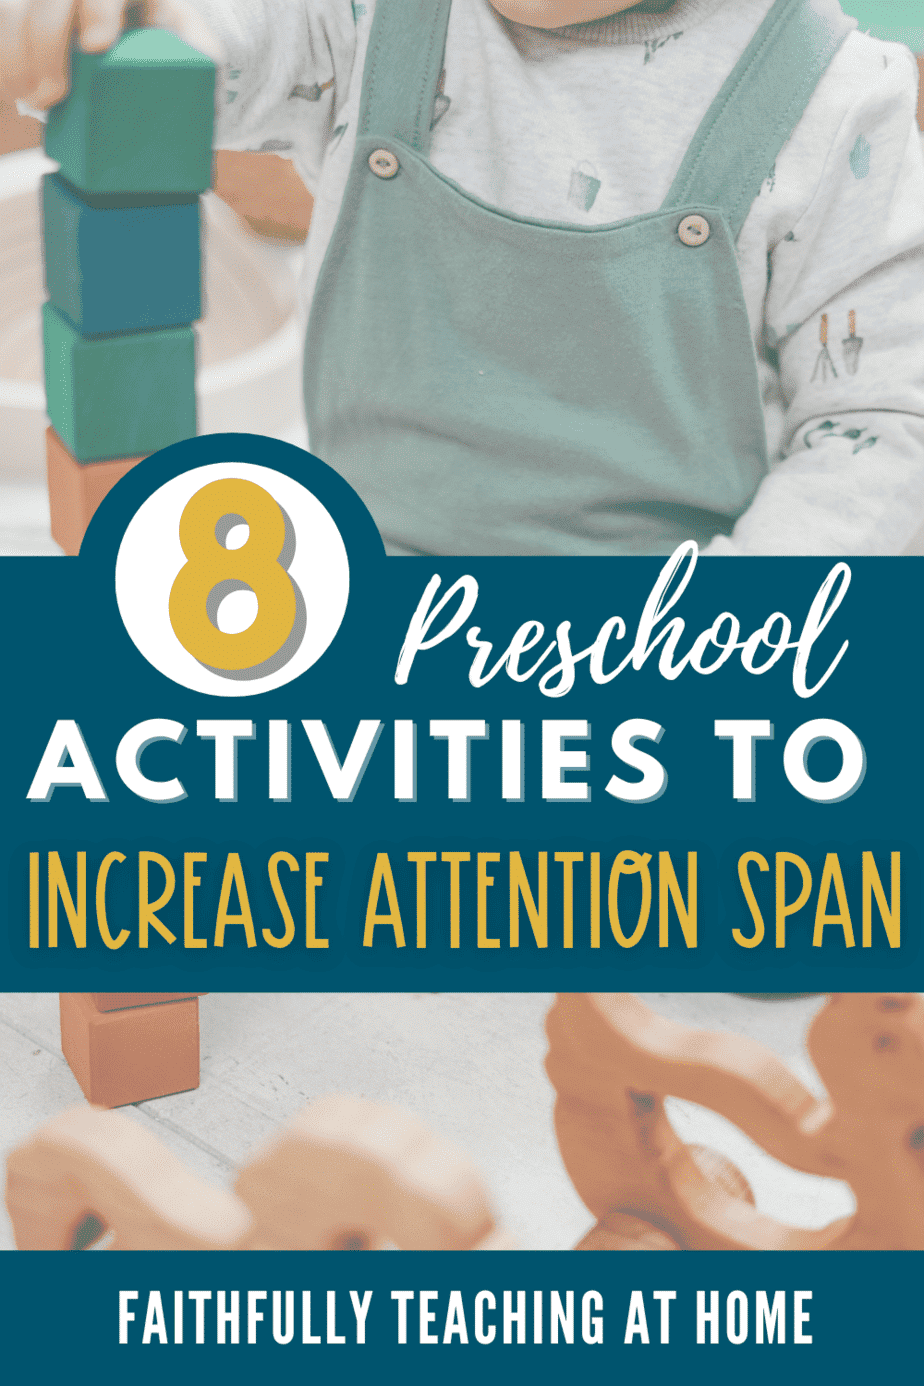 Activities to Increase Attention Span